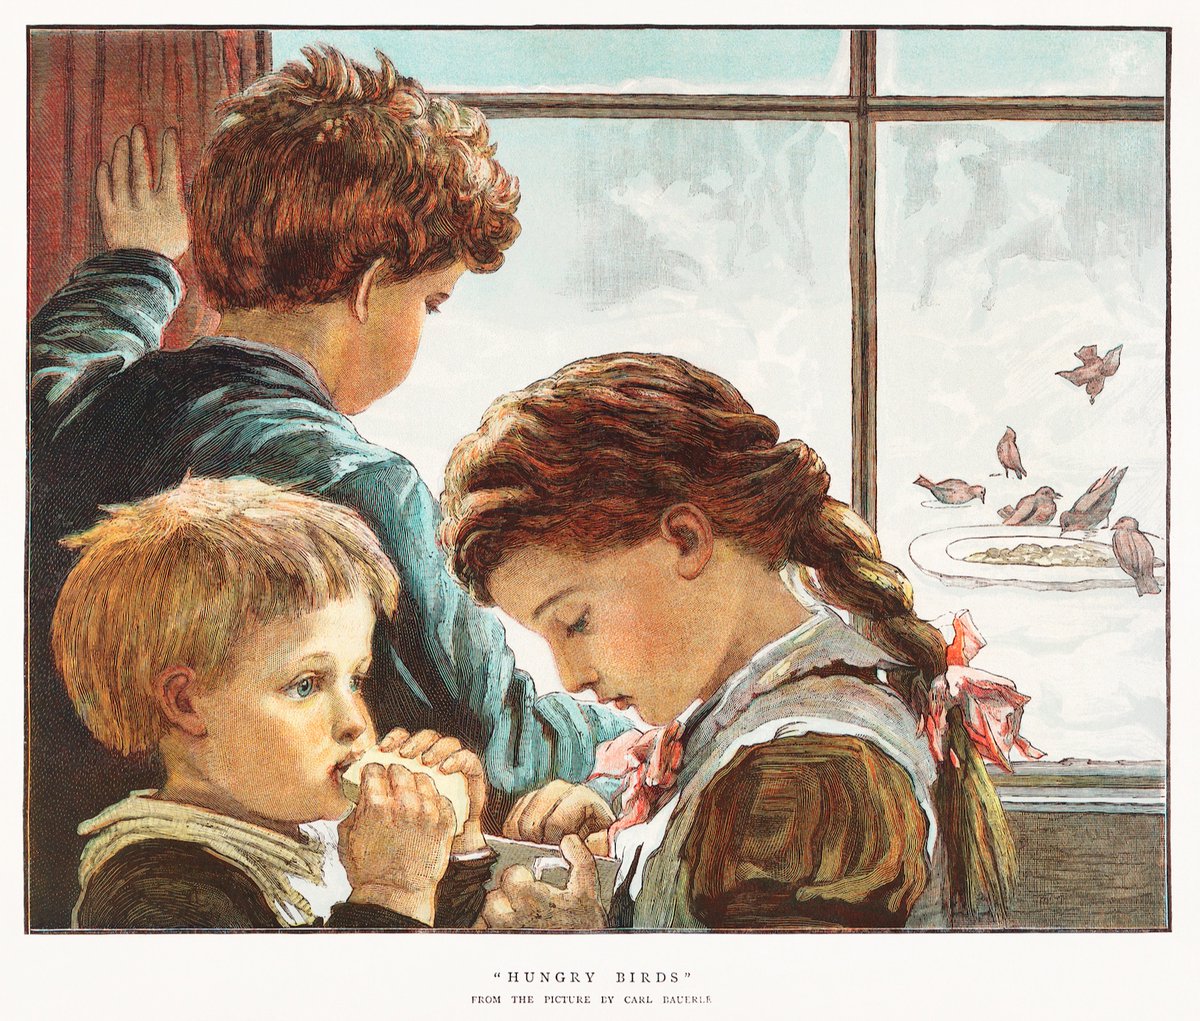 Hungry Birds (children eating bread inside while outside, hungry birds eat), illustration by Carl Bauerle, The Graphic Christmas Number 1882. Image and copyright: Public Domain, via @byrawpixel #Christmas #Illustration